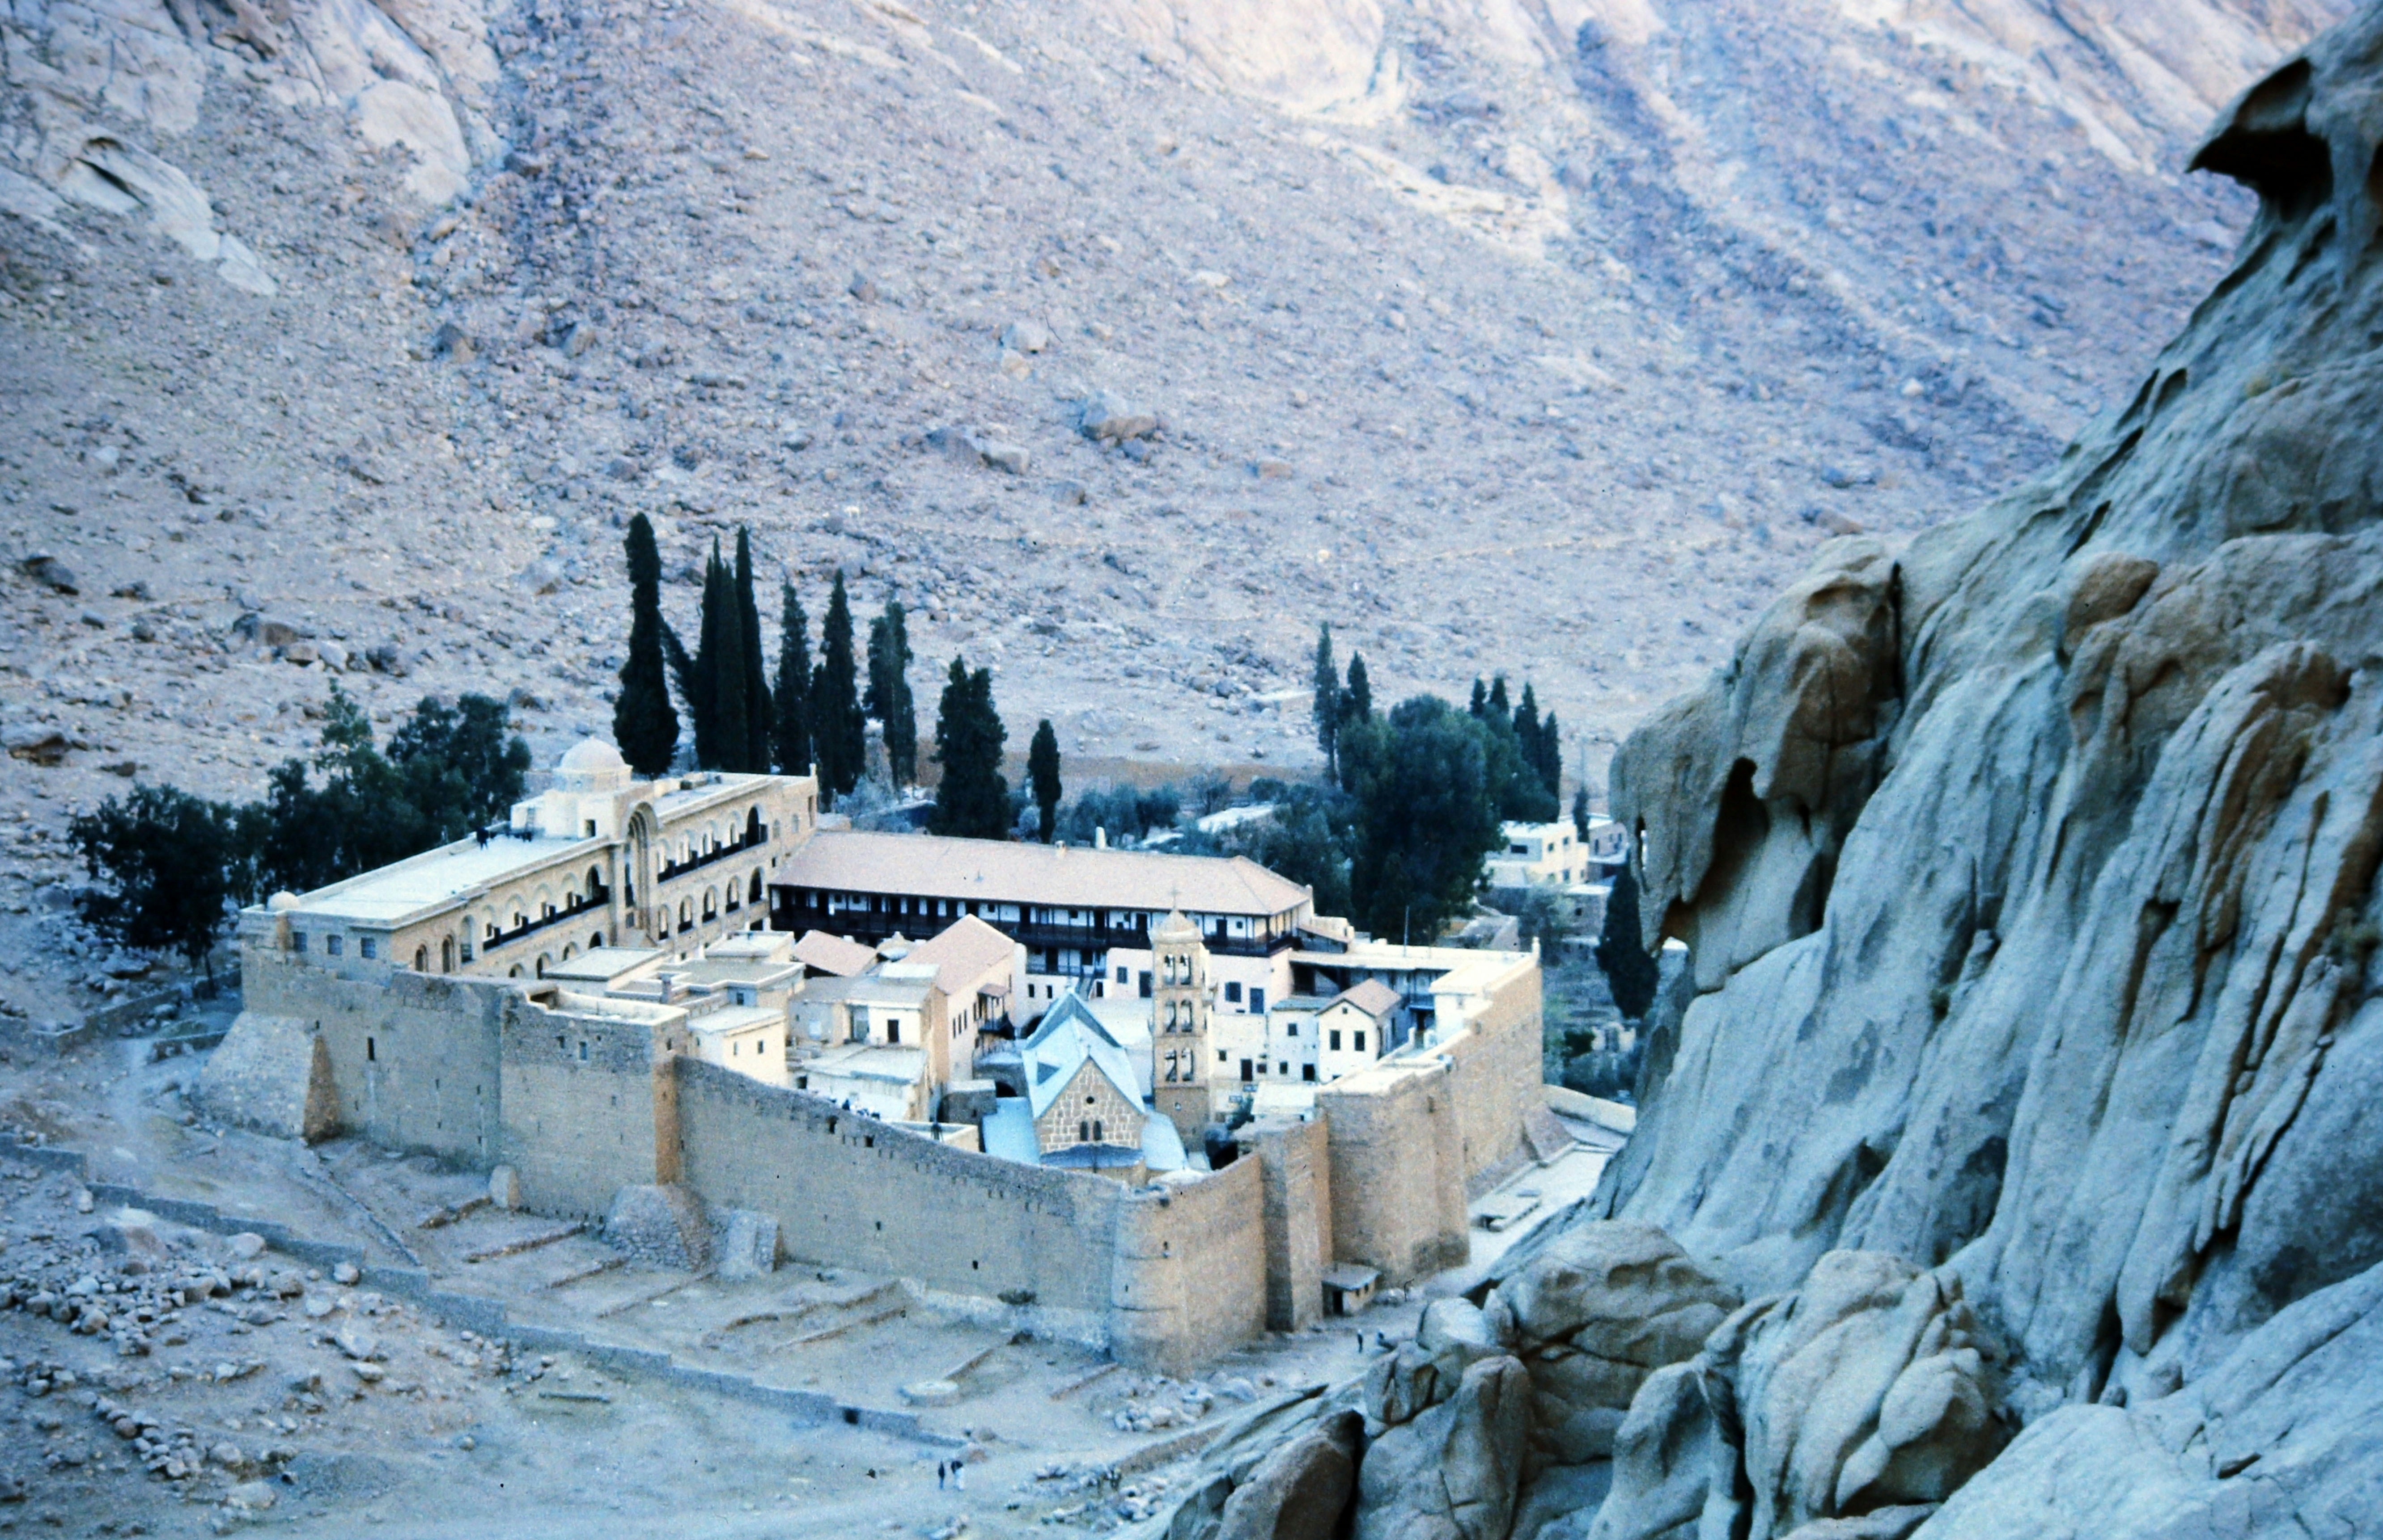 Saint St Catherine's Monastery, located at the foot of Mount Sinai, the world's oldest Christian monastry.